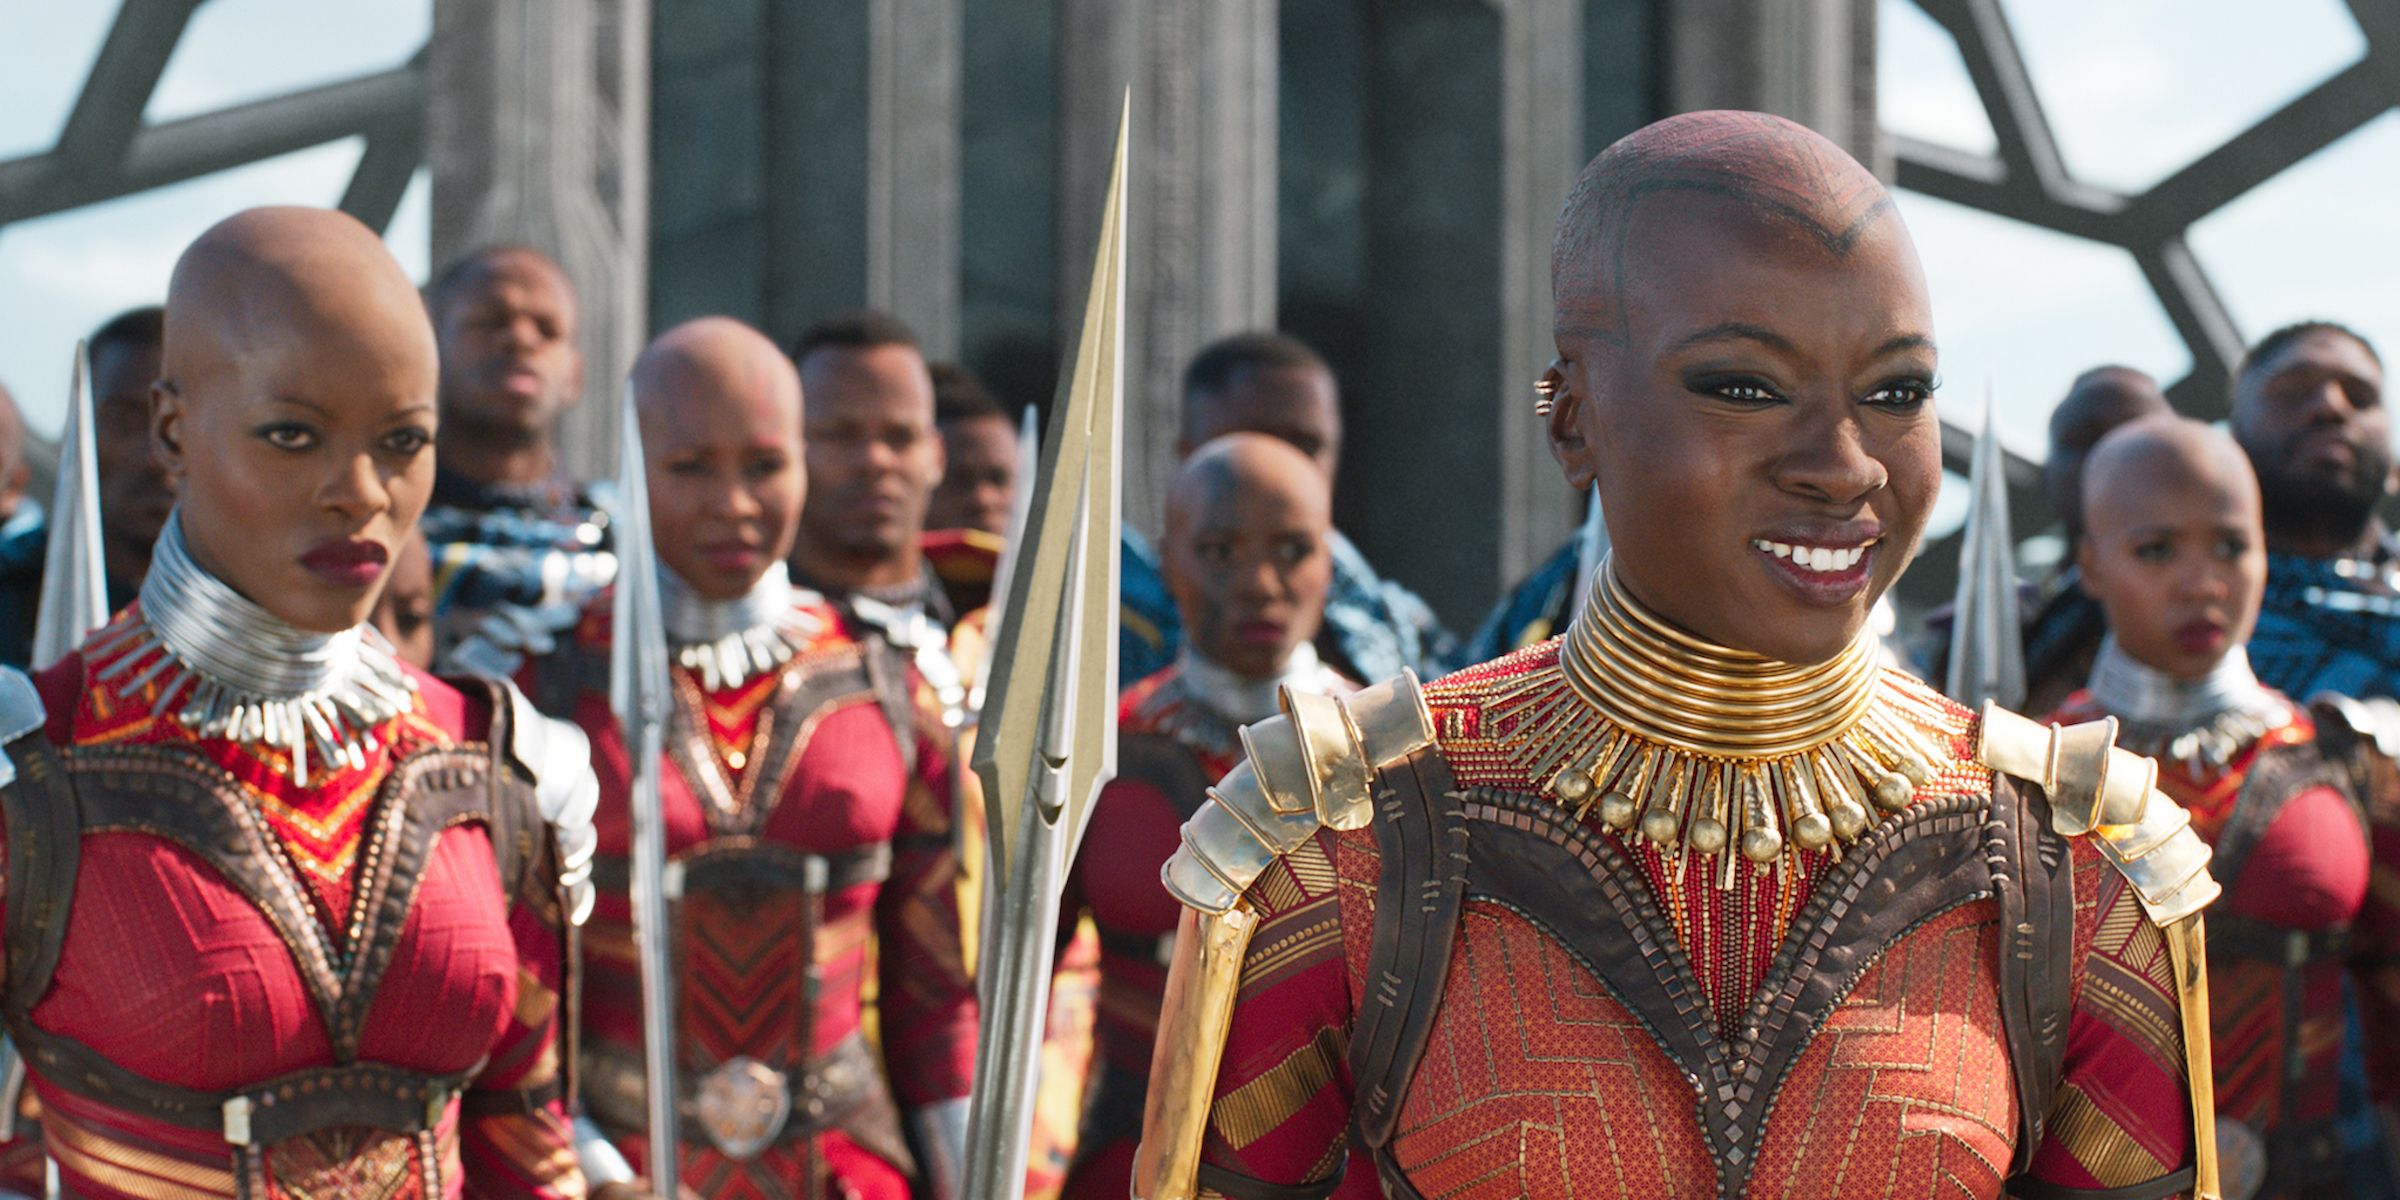 Okoye smiling with the Dora Milaje behind her in Black Panther.